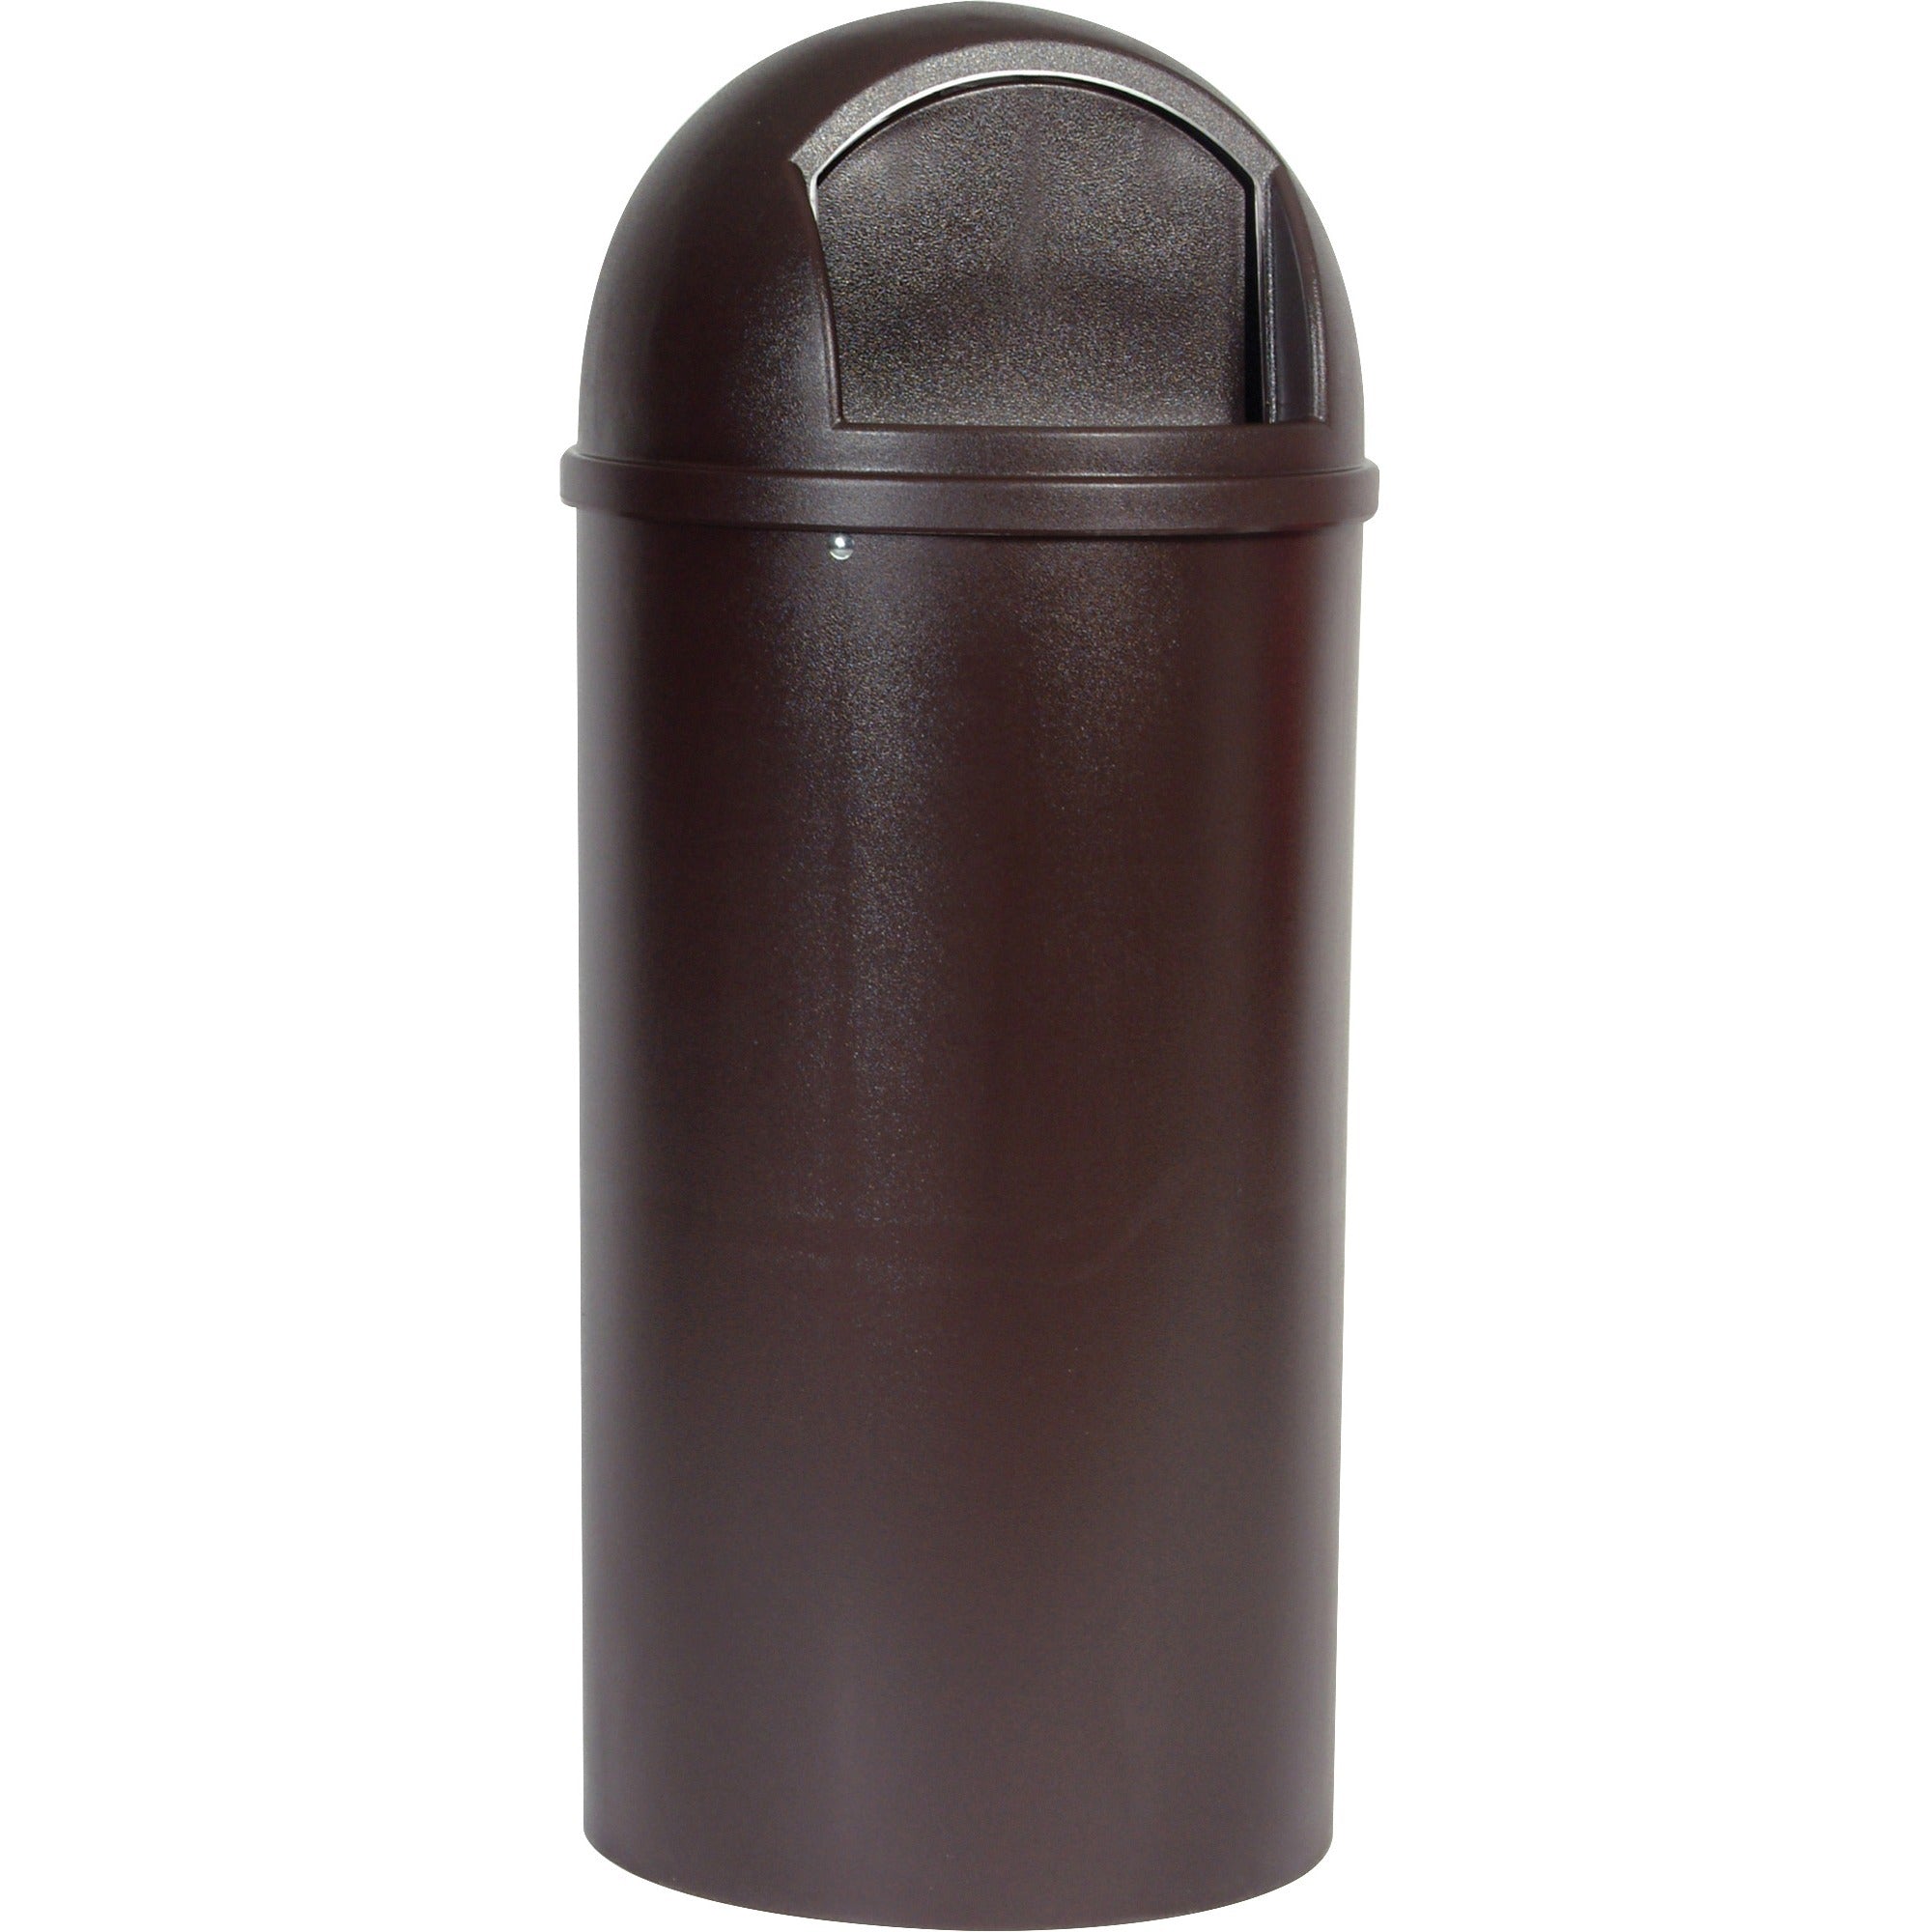 Rubbermaid Commercial Marshal 25-gallon Container - 25 gal Capacity - Fire-Safe, Scratch Resistant, Rugged, Dent Resistant, Scratch Resistant, Hinged Door - 42" Height x 18" Diameter - Brown - 1 Each